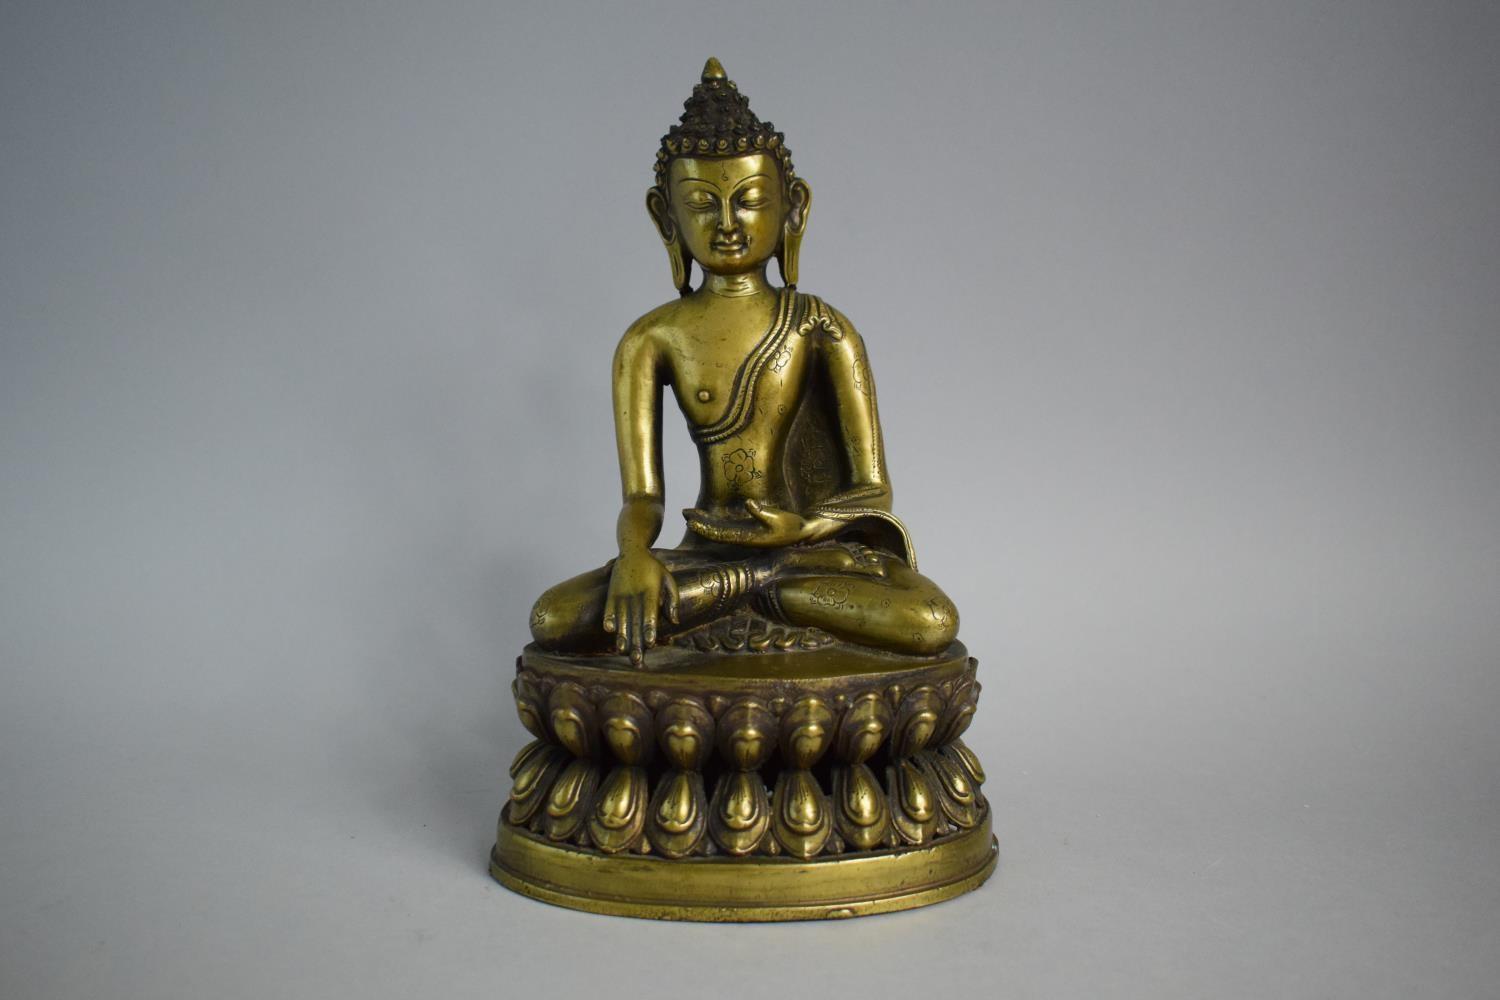 A Bronze Figure of a Thai Buddha on Pierced Lotus Throne Sat in Dhyanasana Posture with Hands